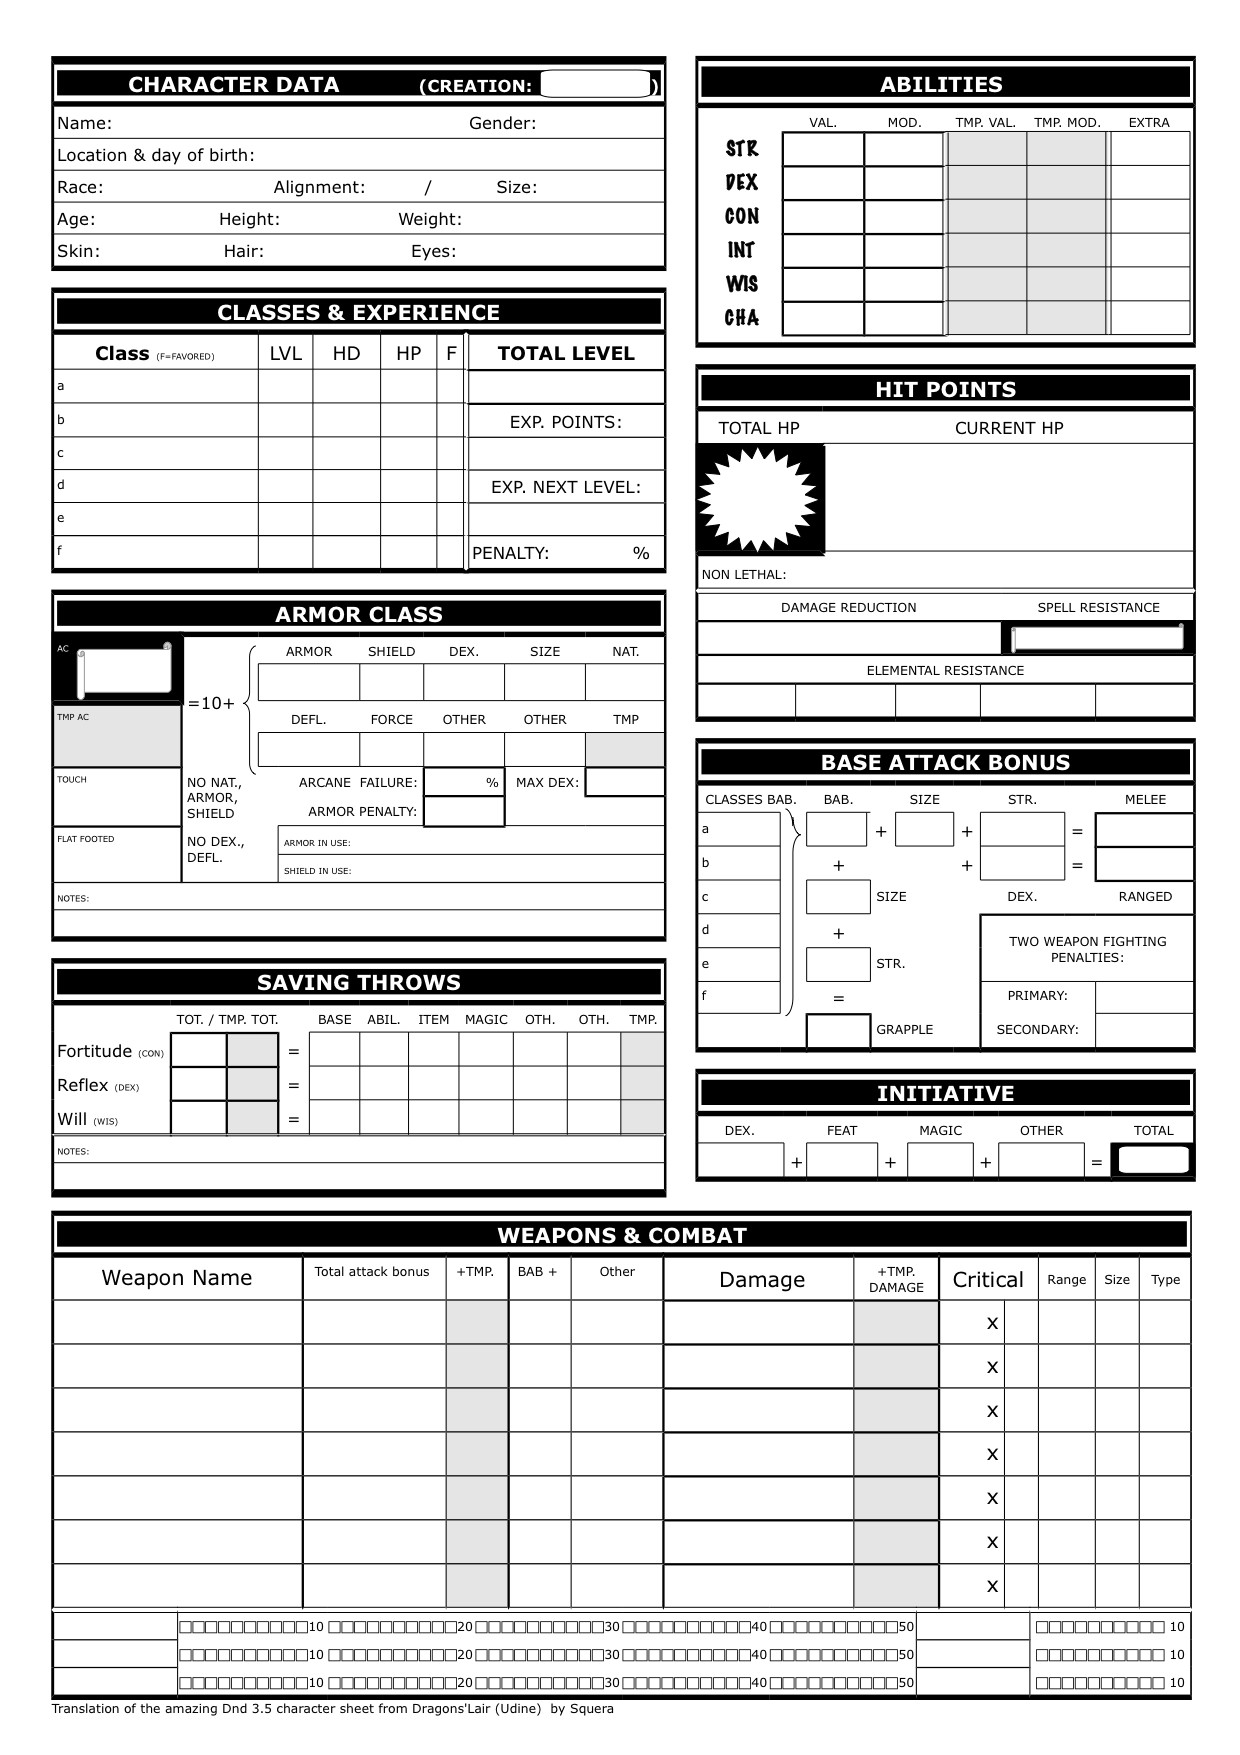 Show off your Character Sheet Designs Role playing Games